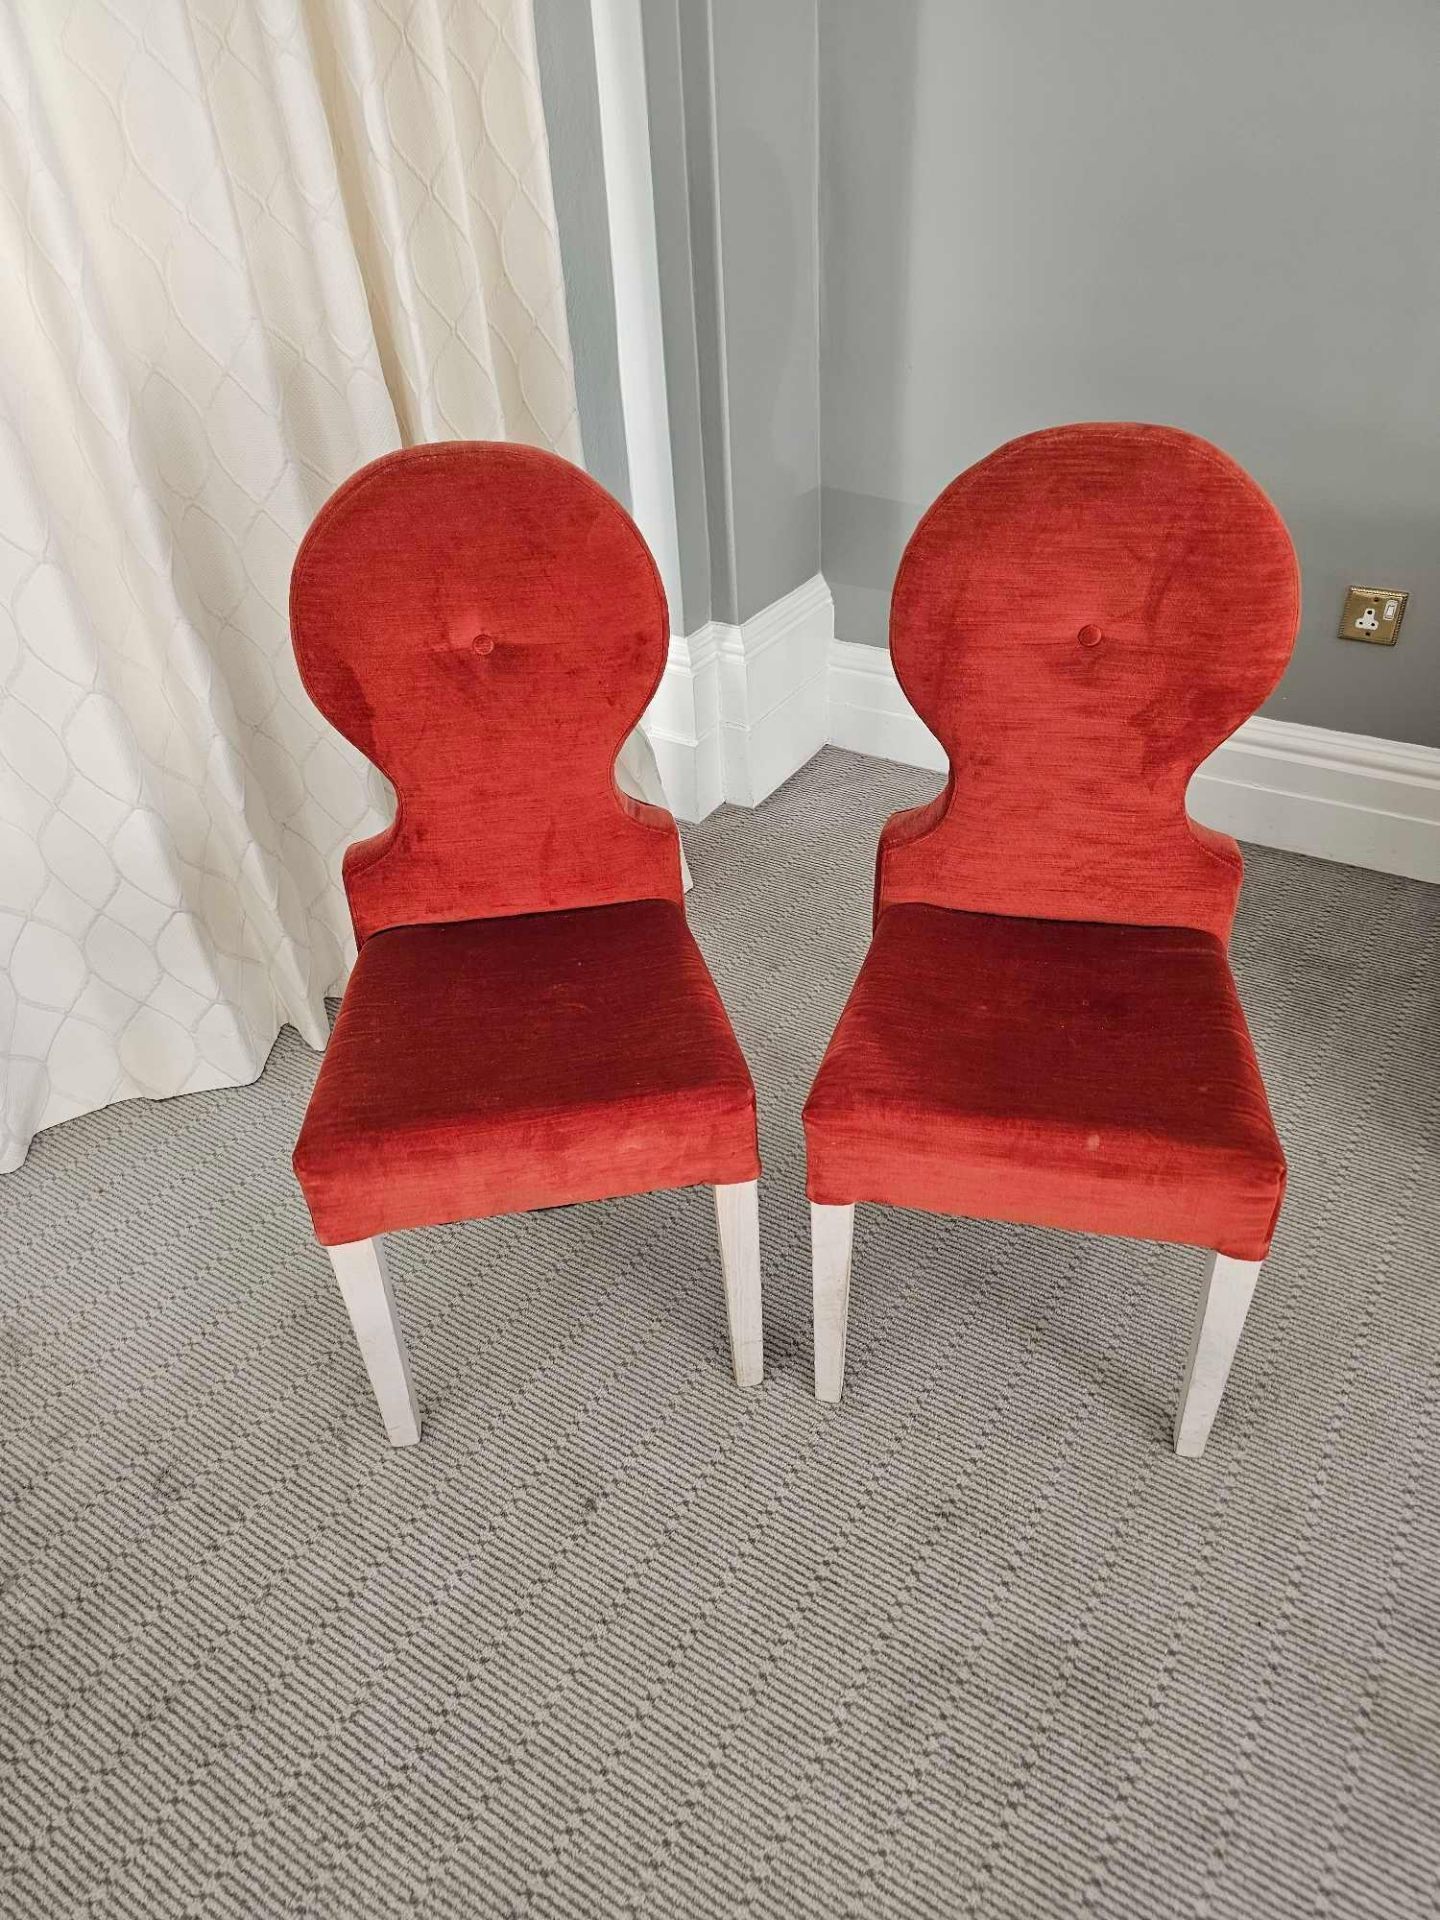 A Pair Of Chairs A Take On The Classic Spoonback Chair Features A Hardwood Frame Upholstered In A - Bild 2 aus 2